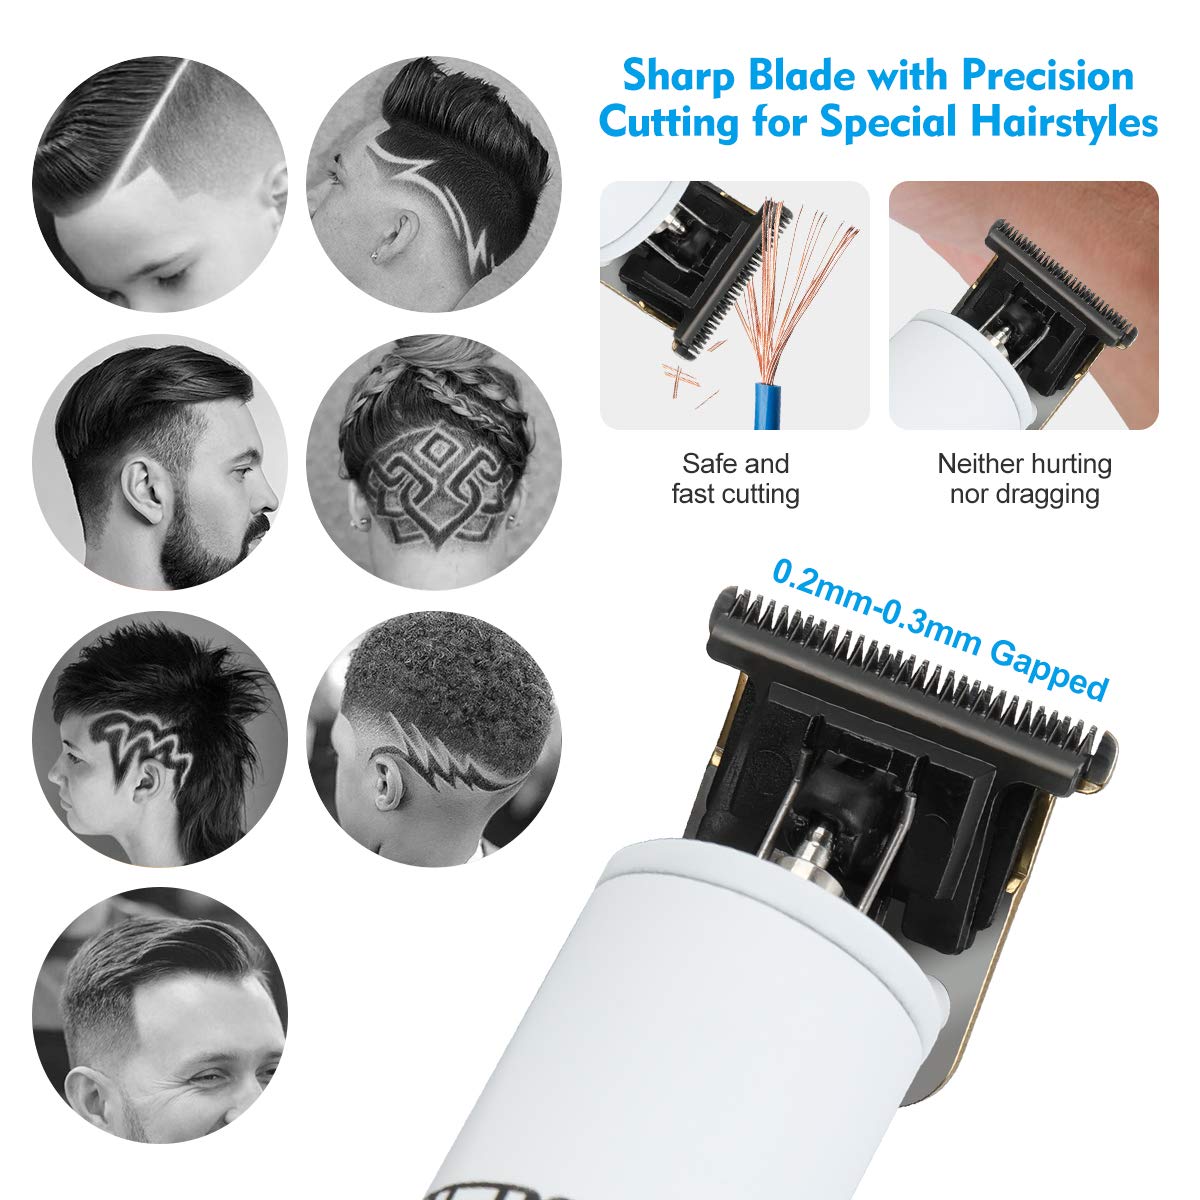 Electric Pro Li Outliner Clippers Barber Grooming Kit - 4 